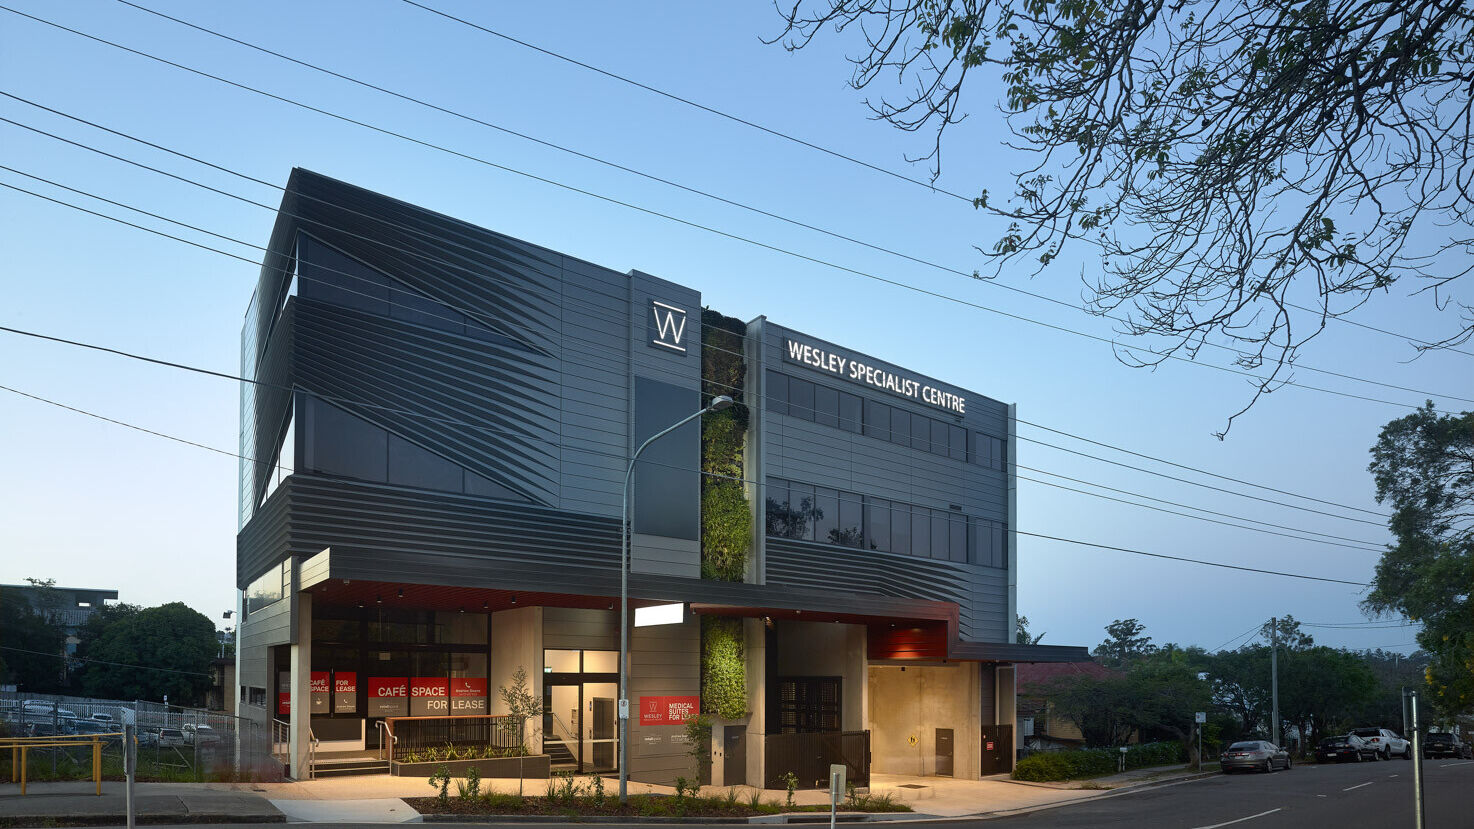 Wesley Specialist Centre